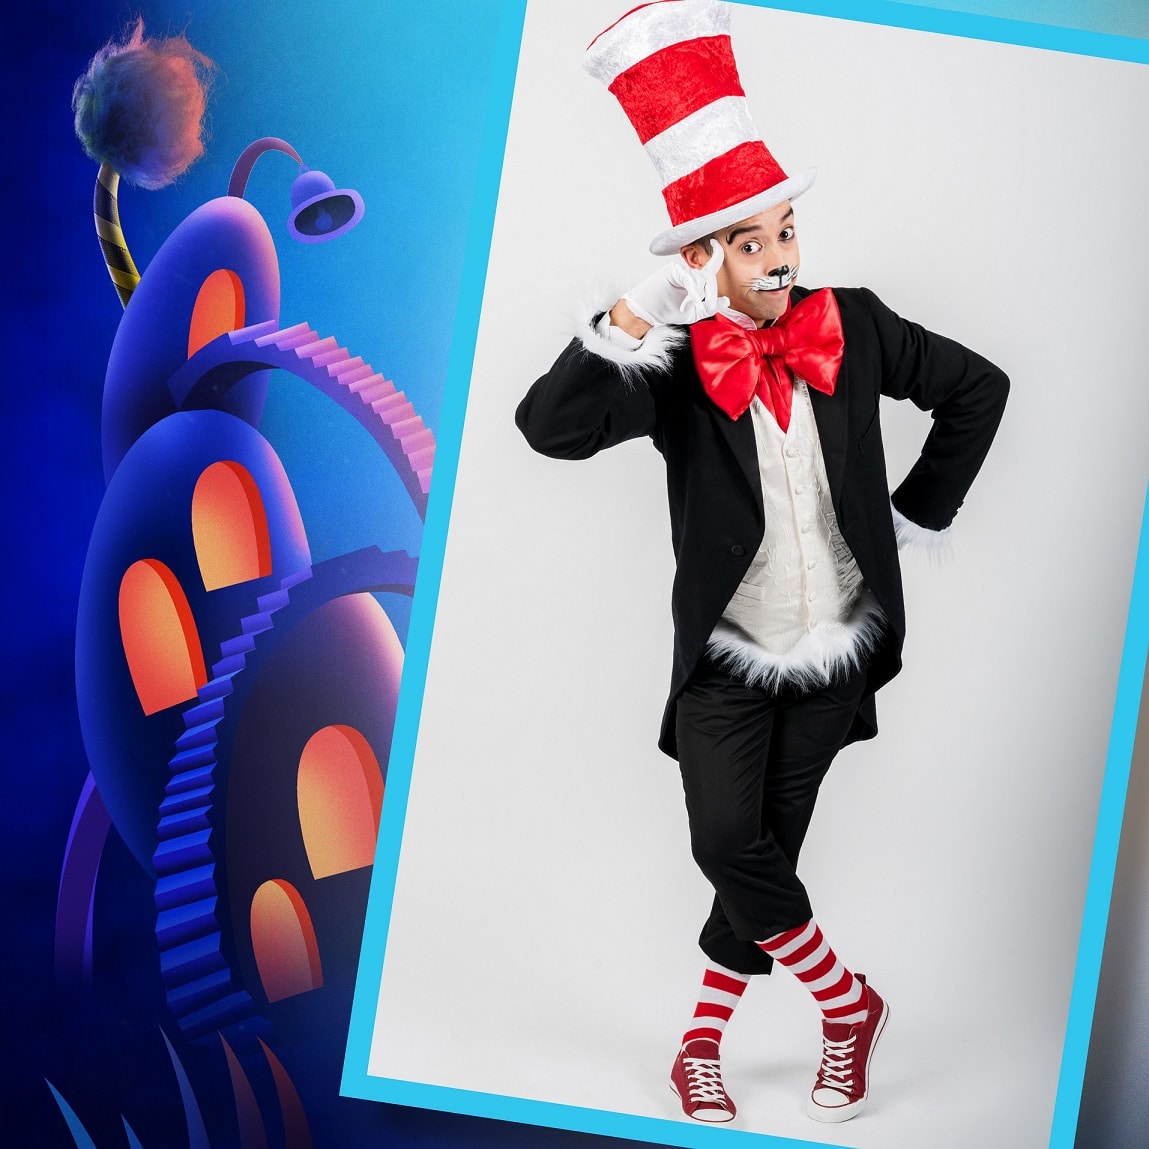 New pictures revealed for 'larger-than-life' Seussical The Musical at the Southwark Playhouse this November